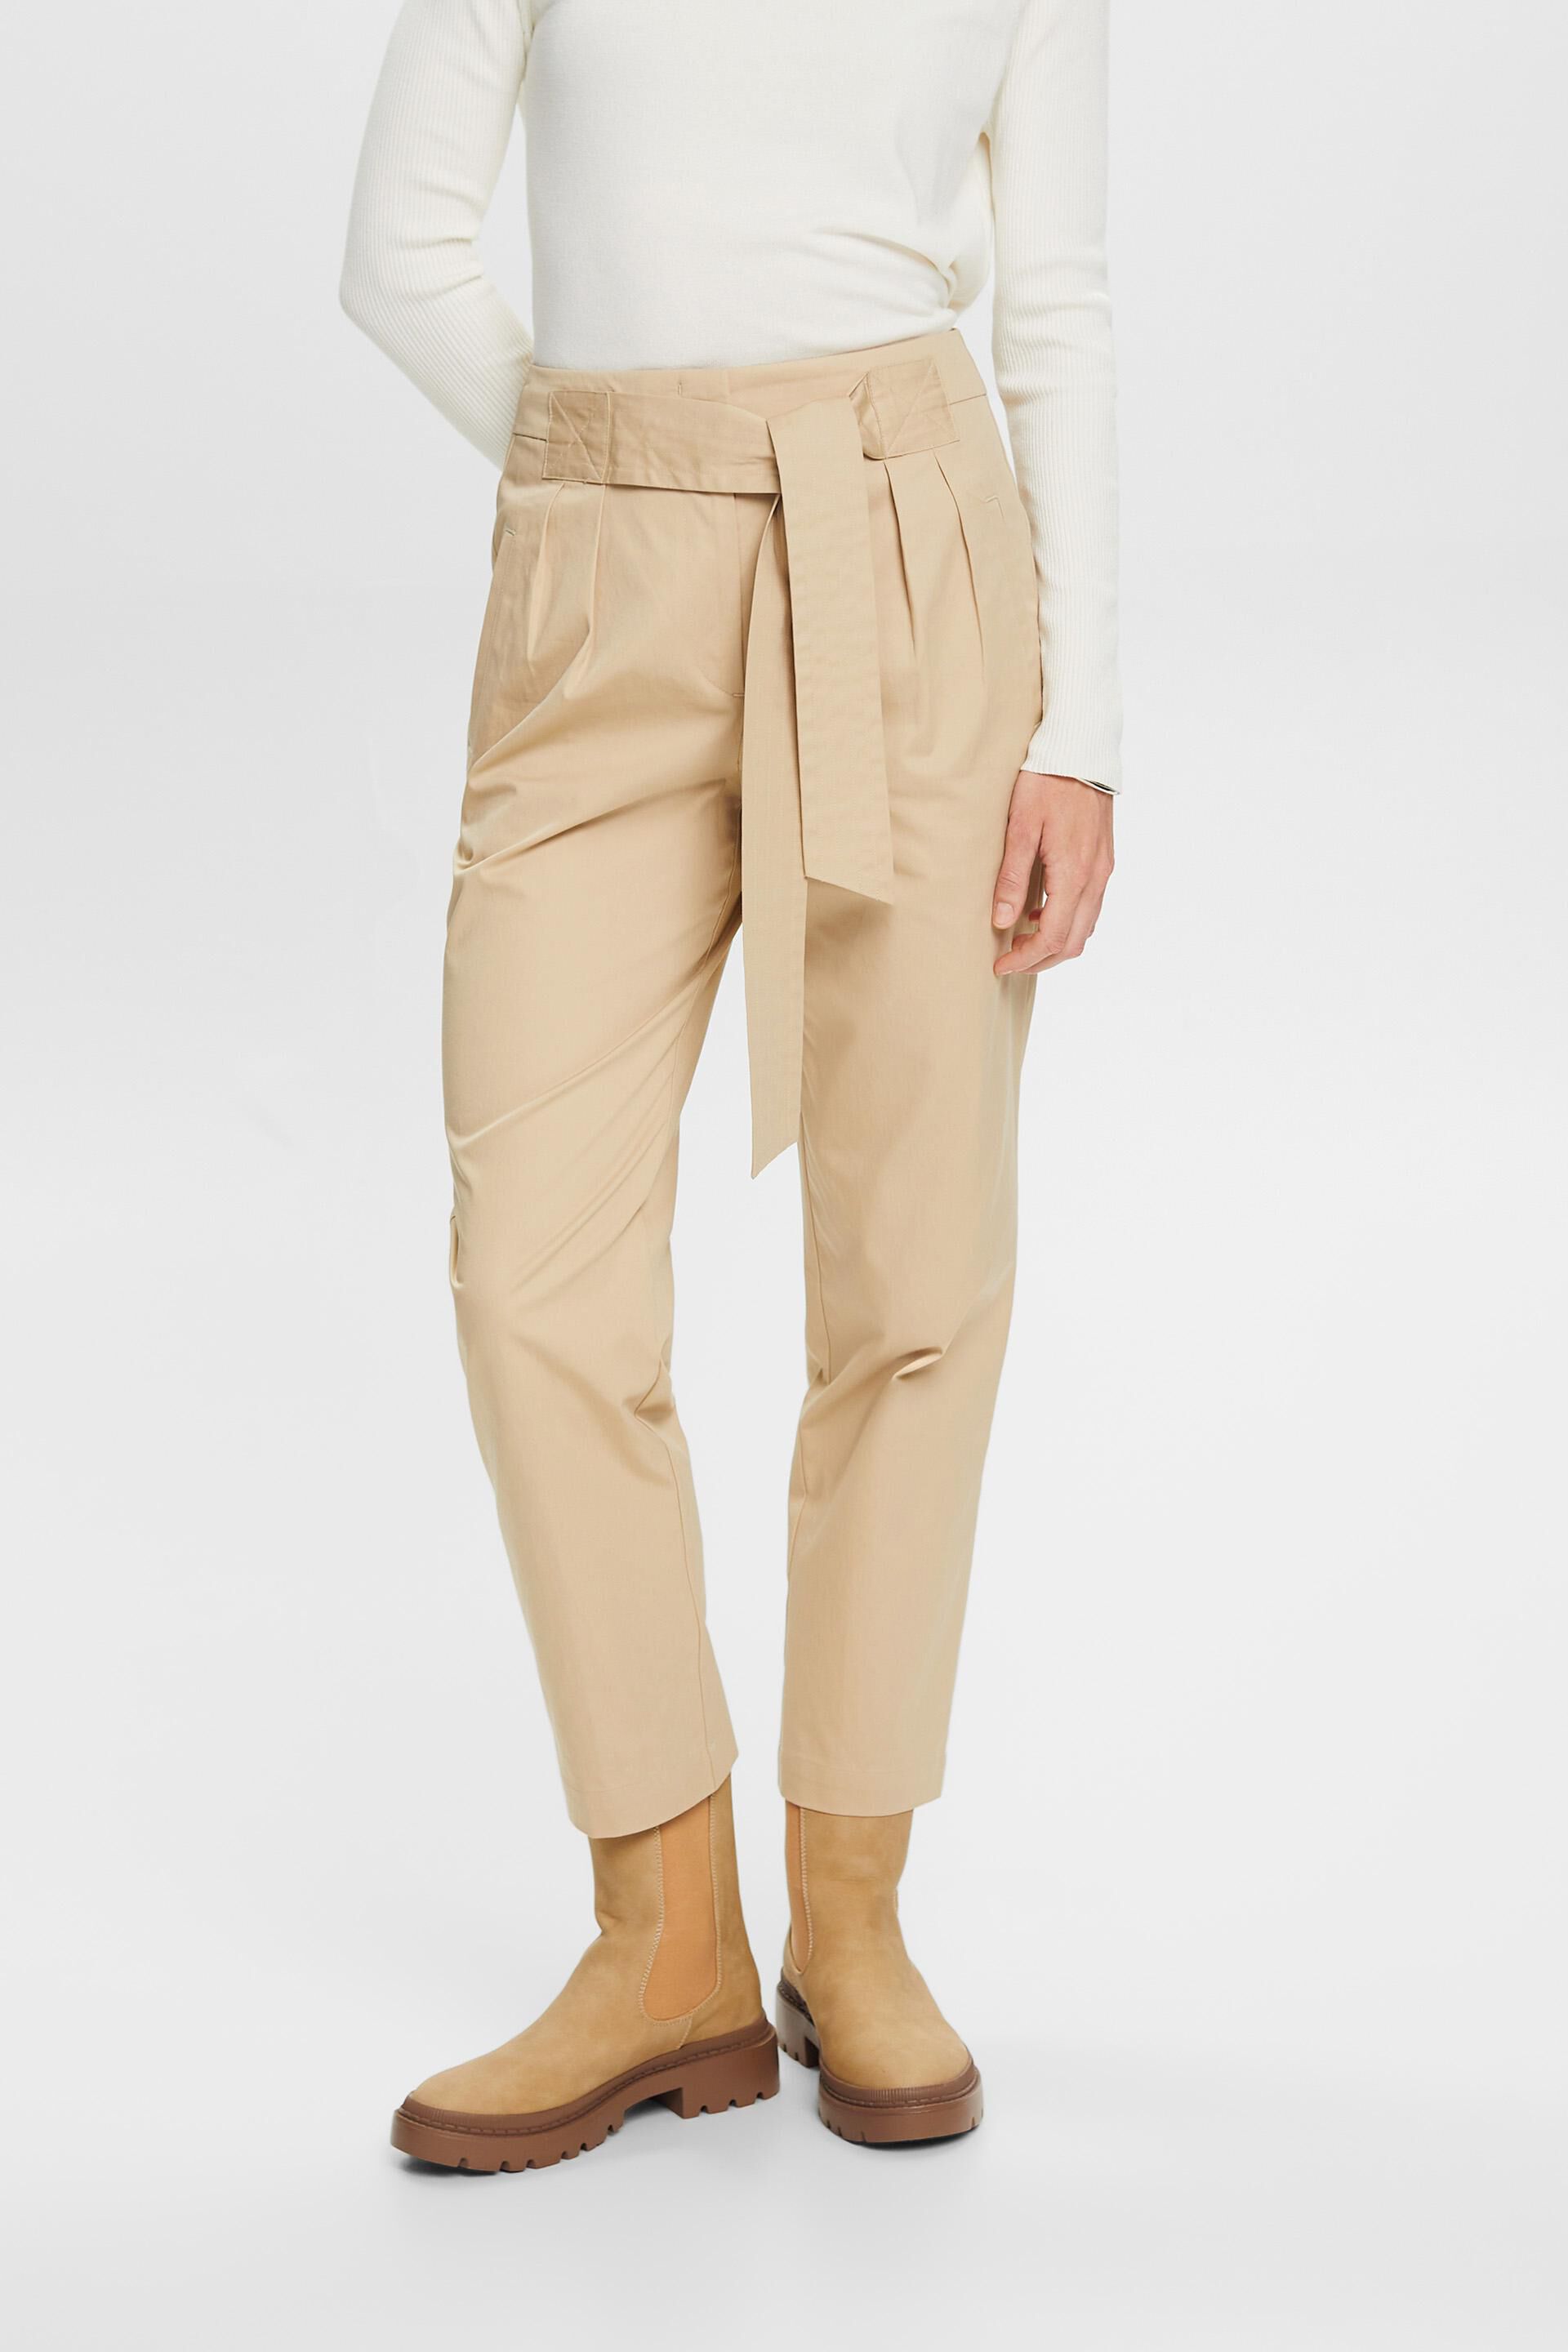 Esprit 100% tie a fixed Chino cotton trousers with belt,